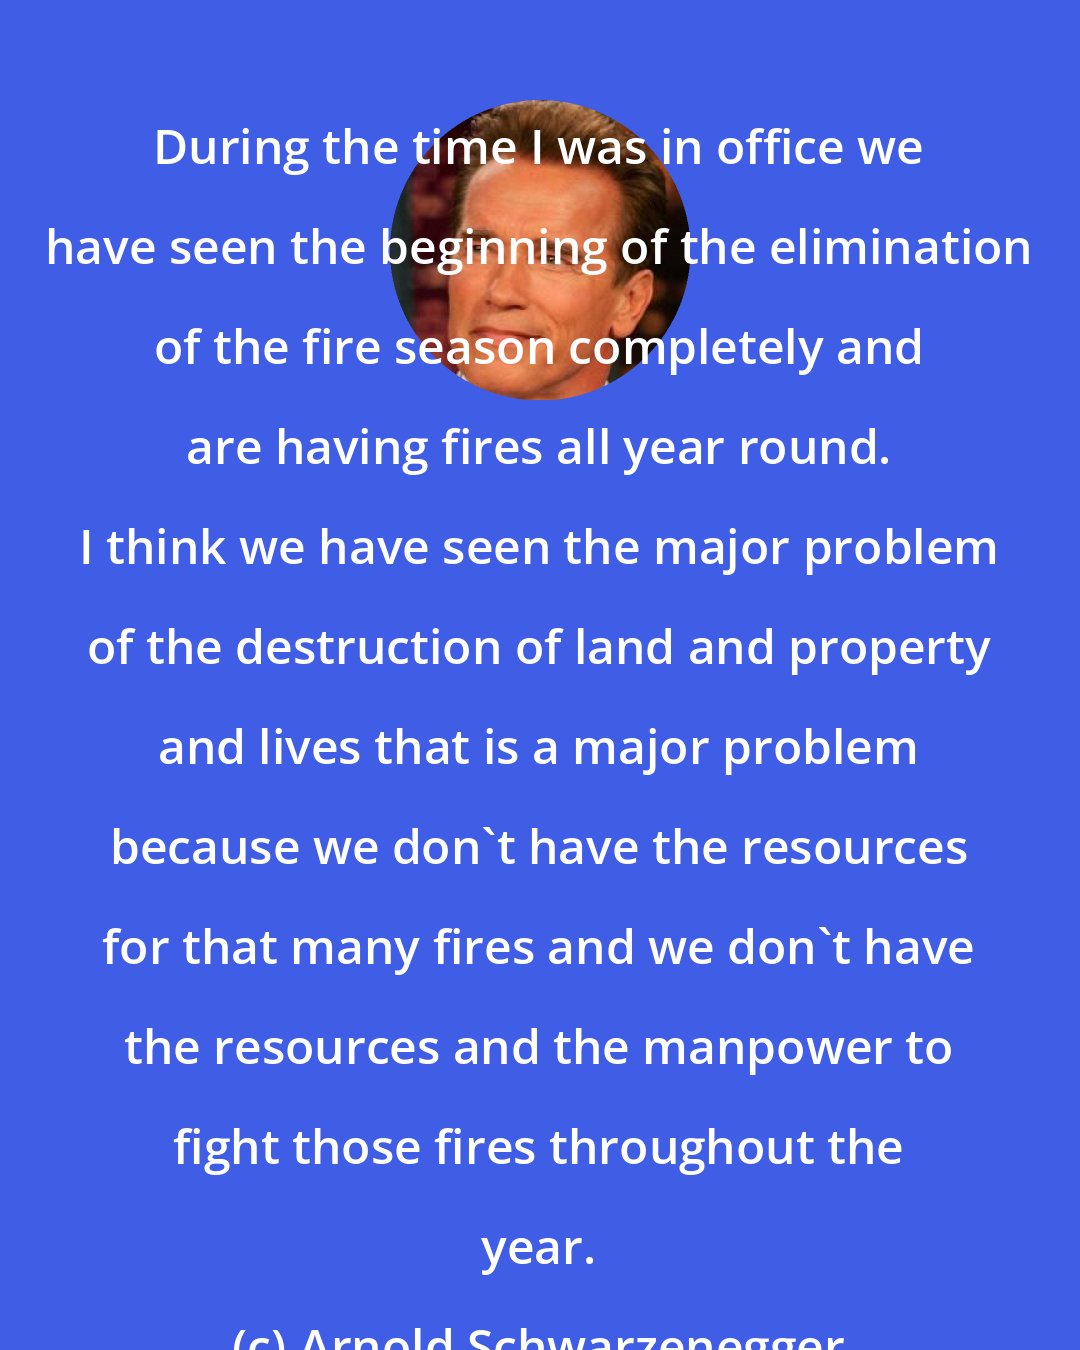 Arnold Schwarzenegger: During the time I was in office we have seen the beginning of the elimination of the fire season completely and are having fires all year round. I think we have seen the major problem of the destruction of land and property and lives that is a major problem because we don't have the resources for that many fires and we don't have the resources and the manpower to fight those fires throughout the year.